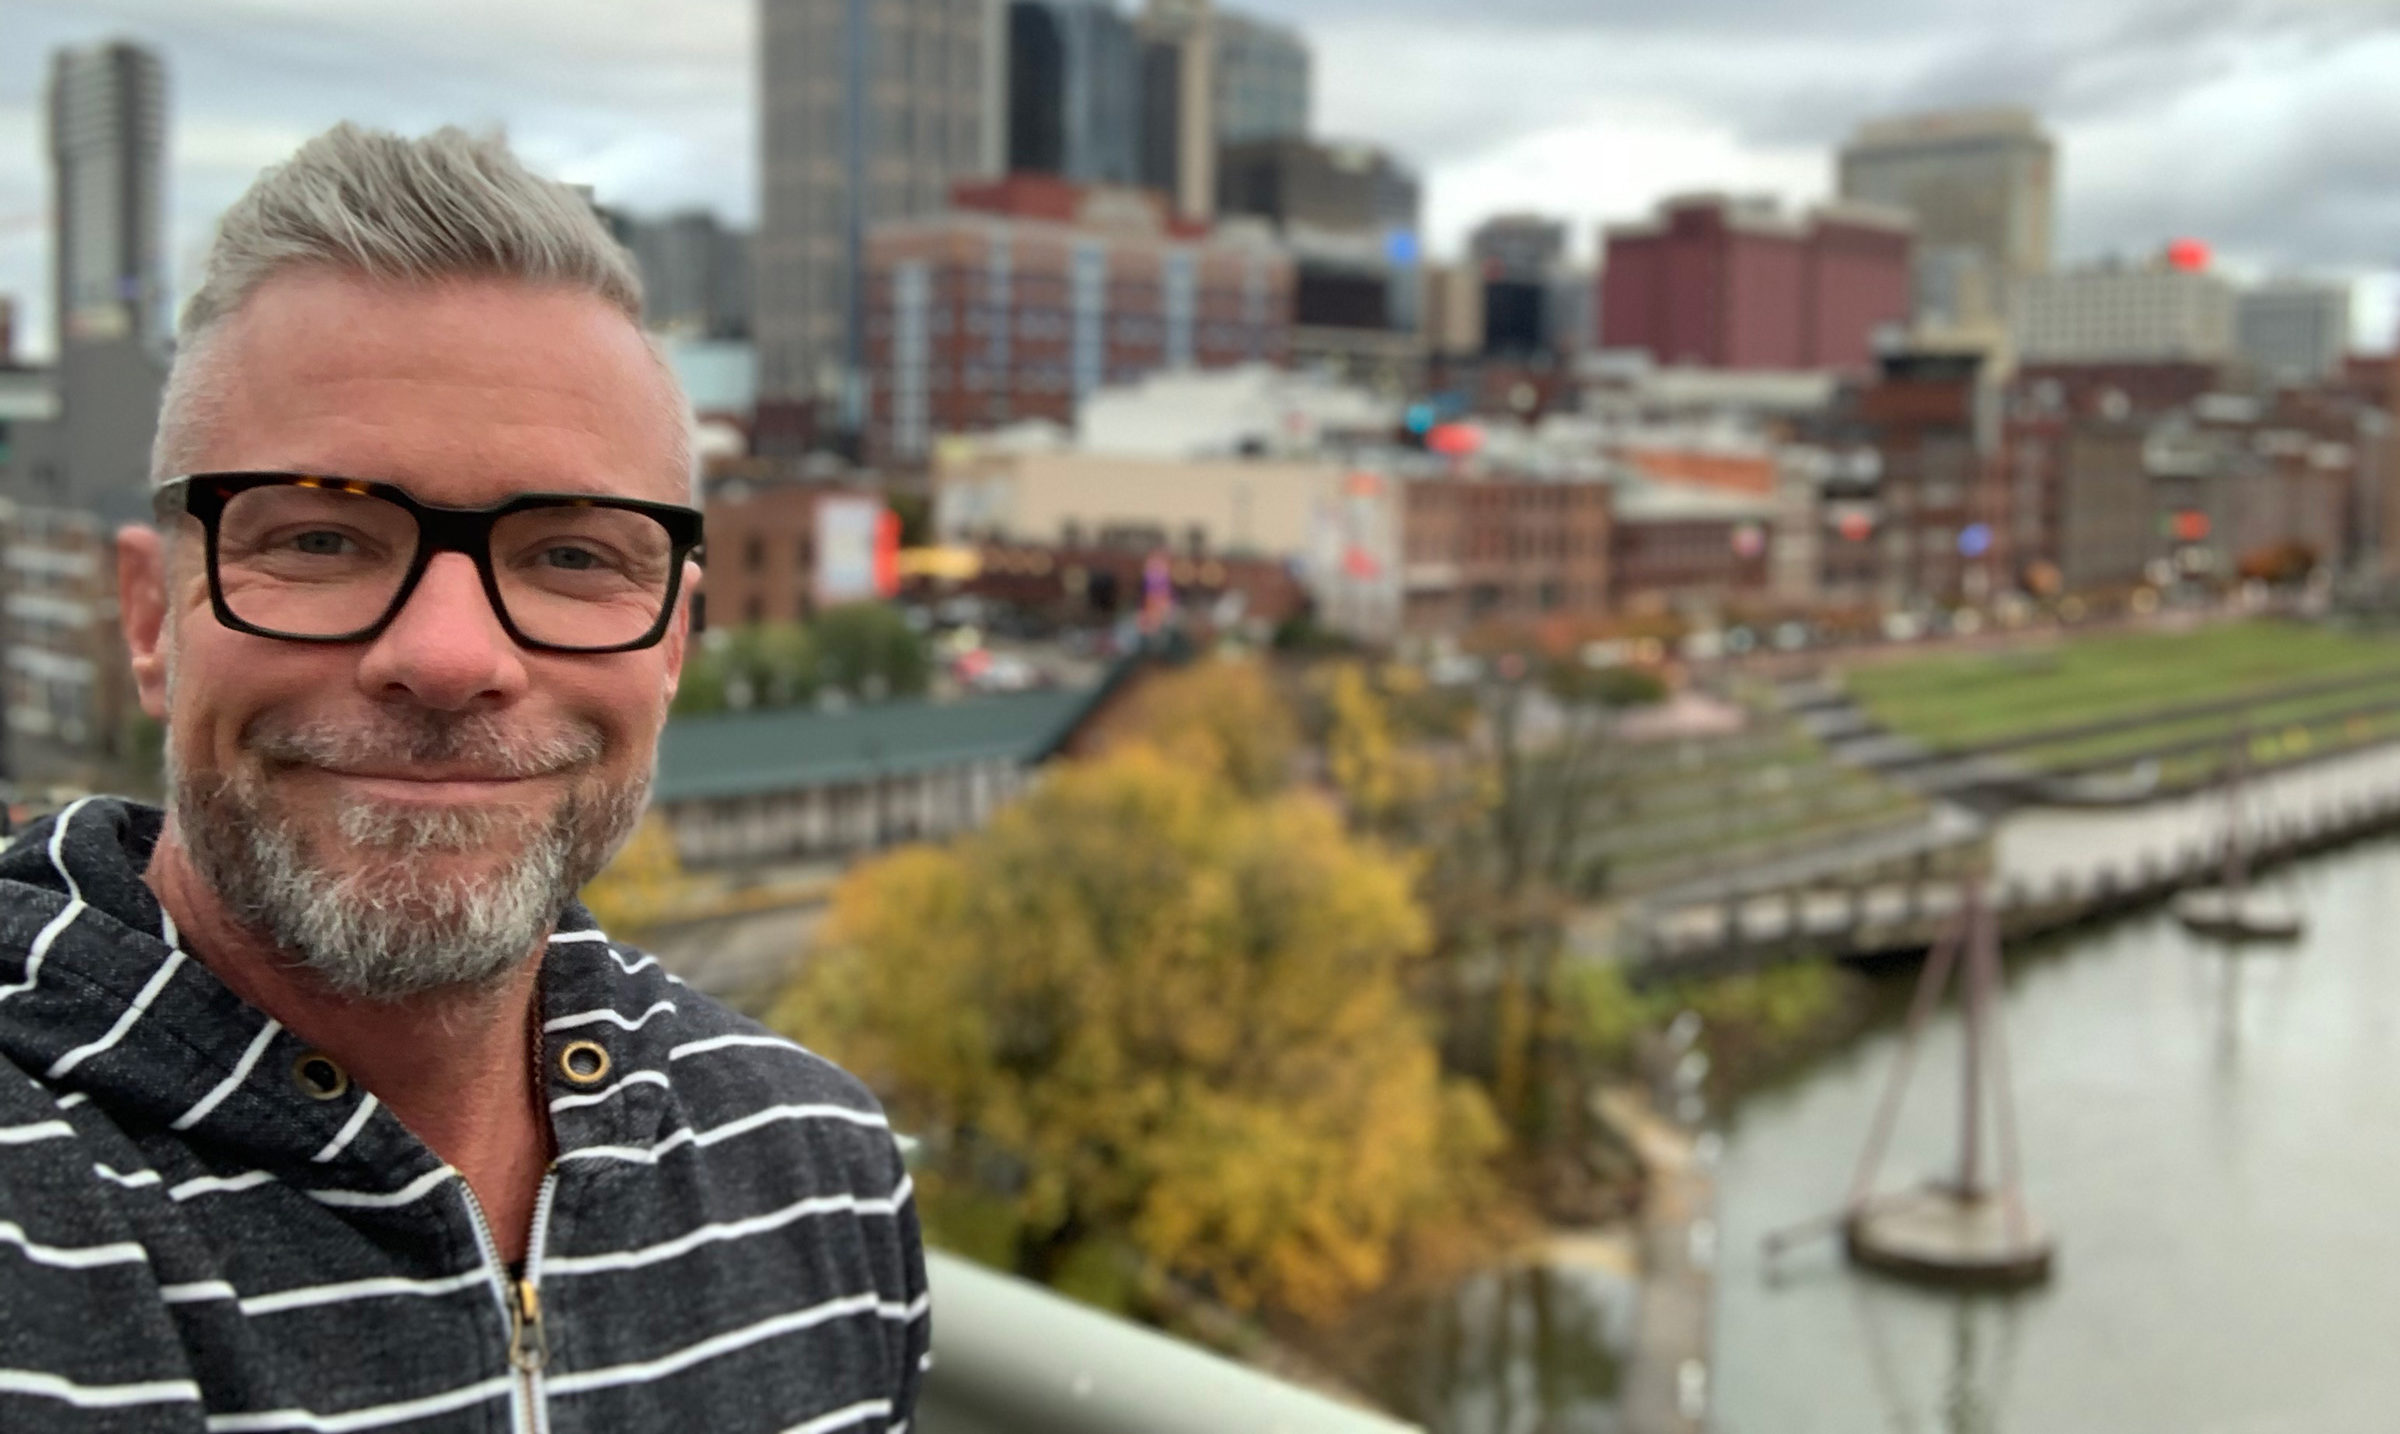 Chad Goldman pictured near the Cumberland river in Nashville